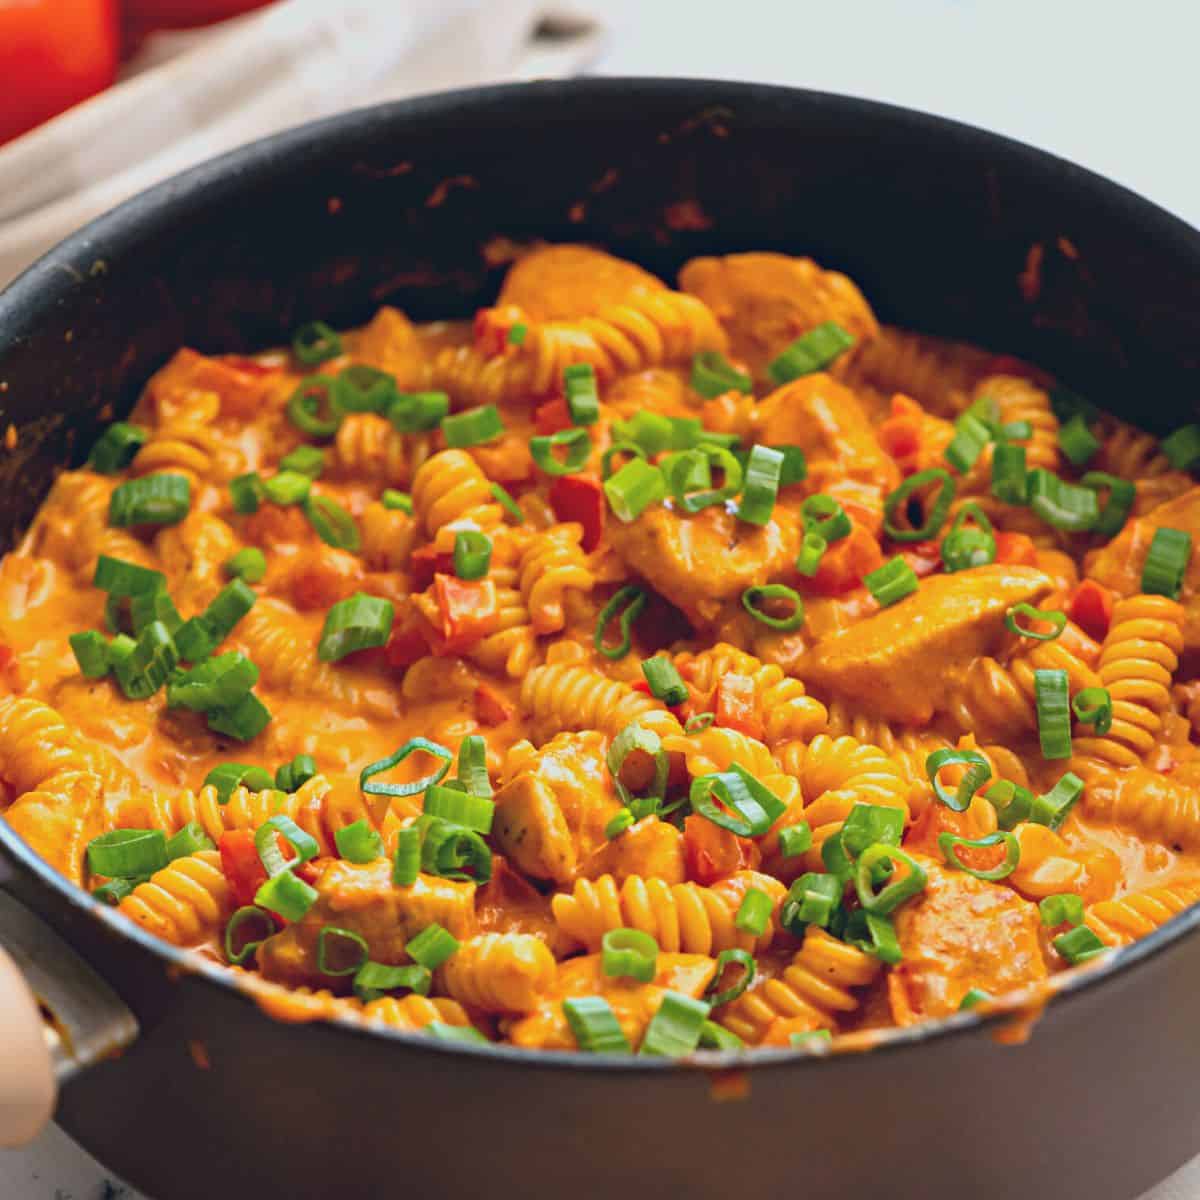 Skillet with Creamy Chicken Cajun Pasta topped with green onions.